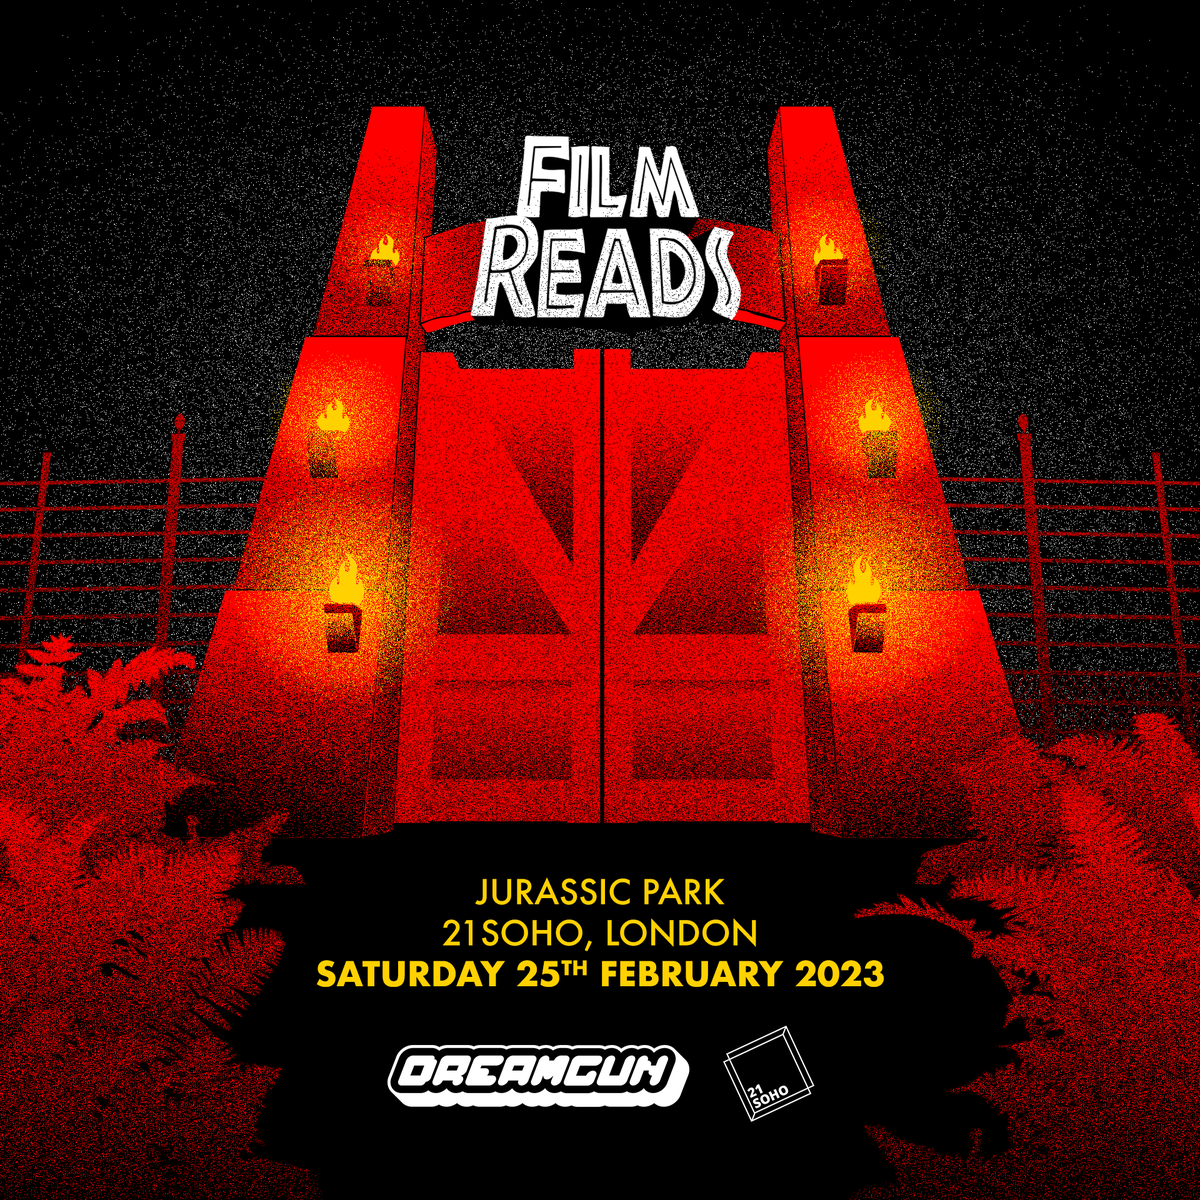 🤩TOMORROW!🤩

Dreamgun presents award winning parody Film Reads! A different Film every month rewritten full of jokes & nonsense & performed by actors & comedians who haven’t rehearsed. This month’s Film Read is Jurassic Park! 🦕

🎟️bit.ly/41qsl6s